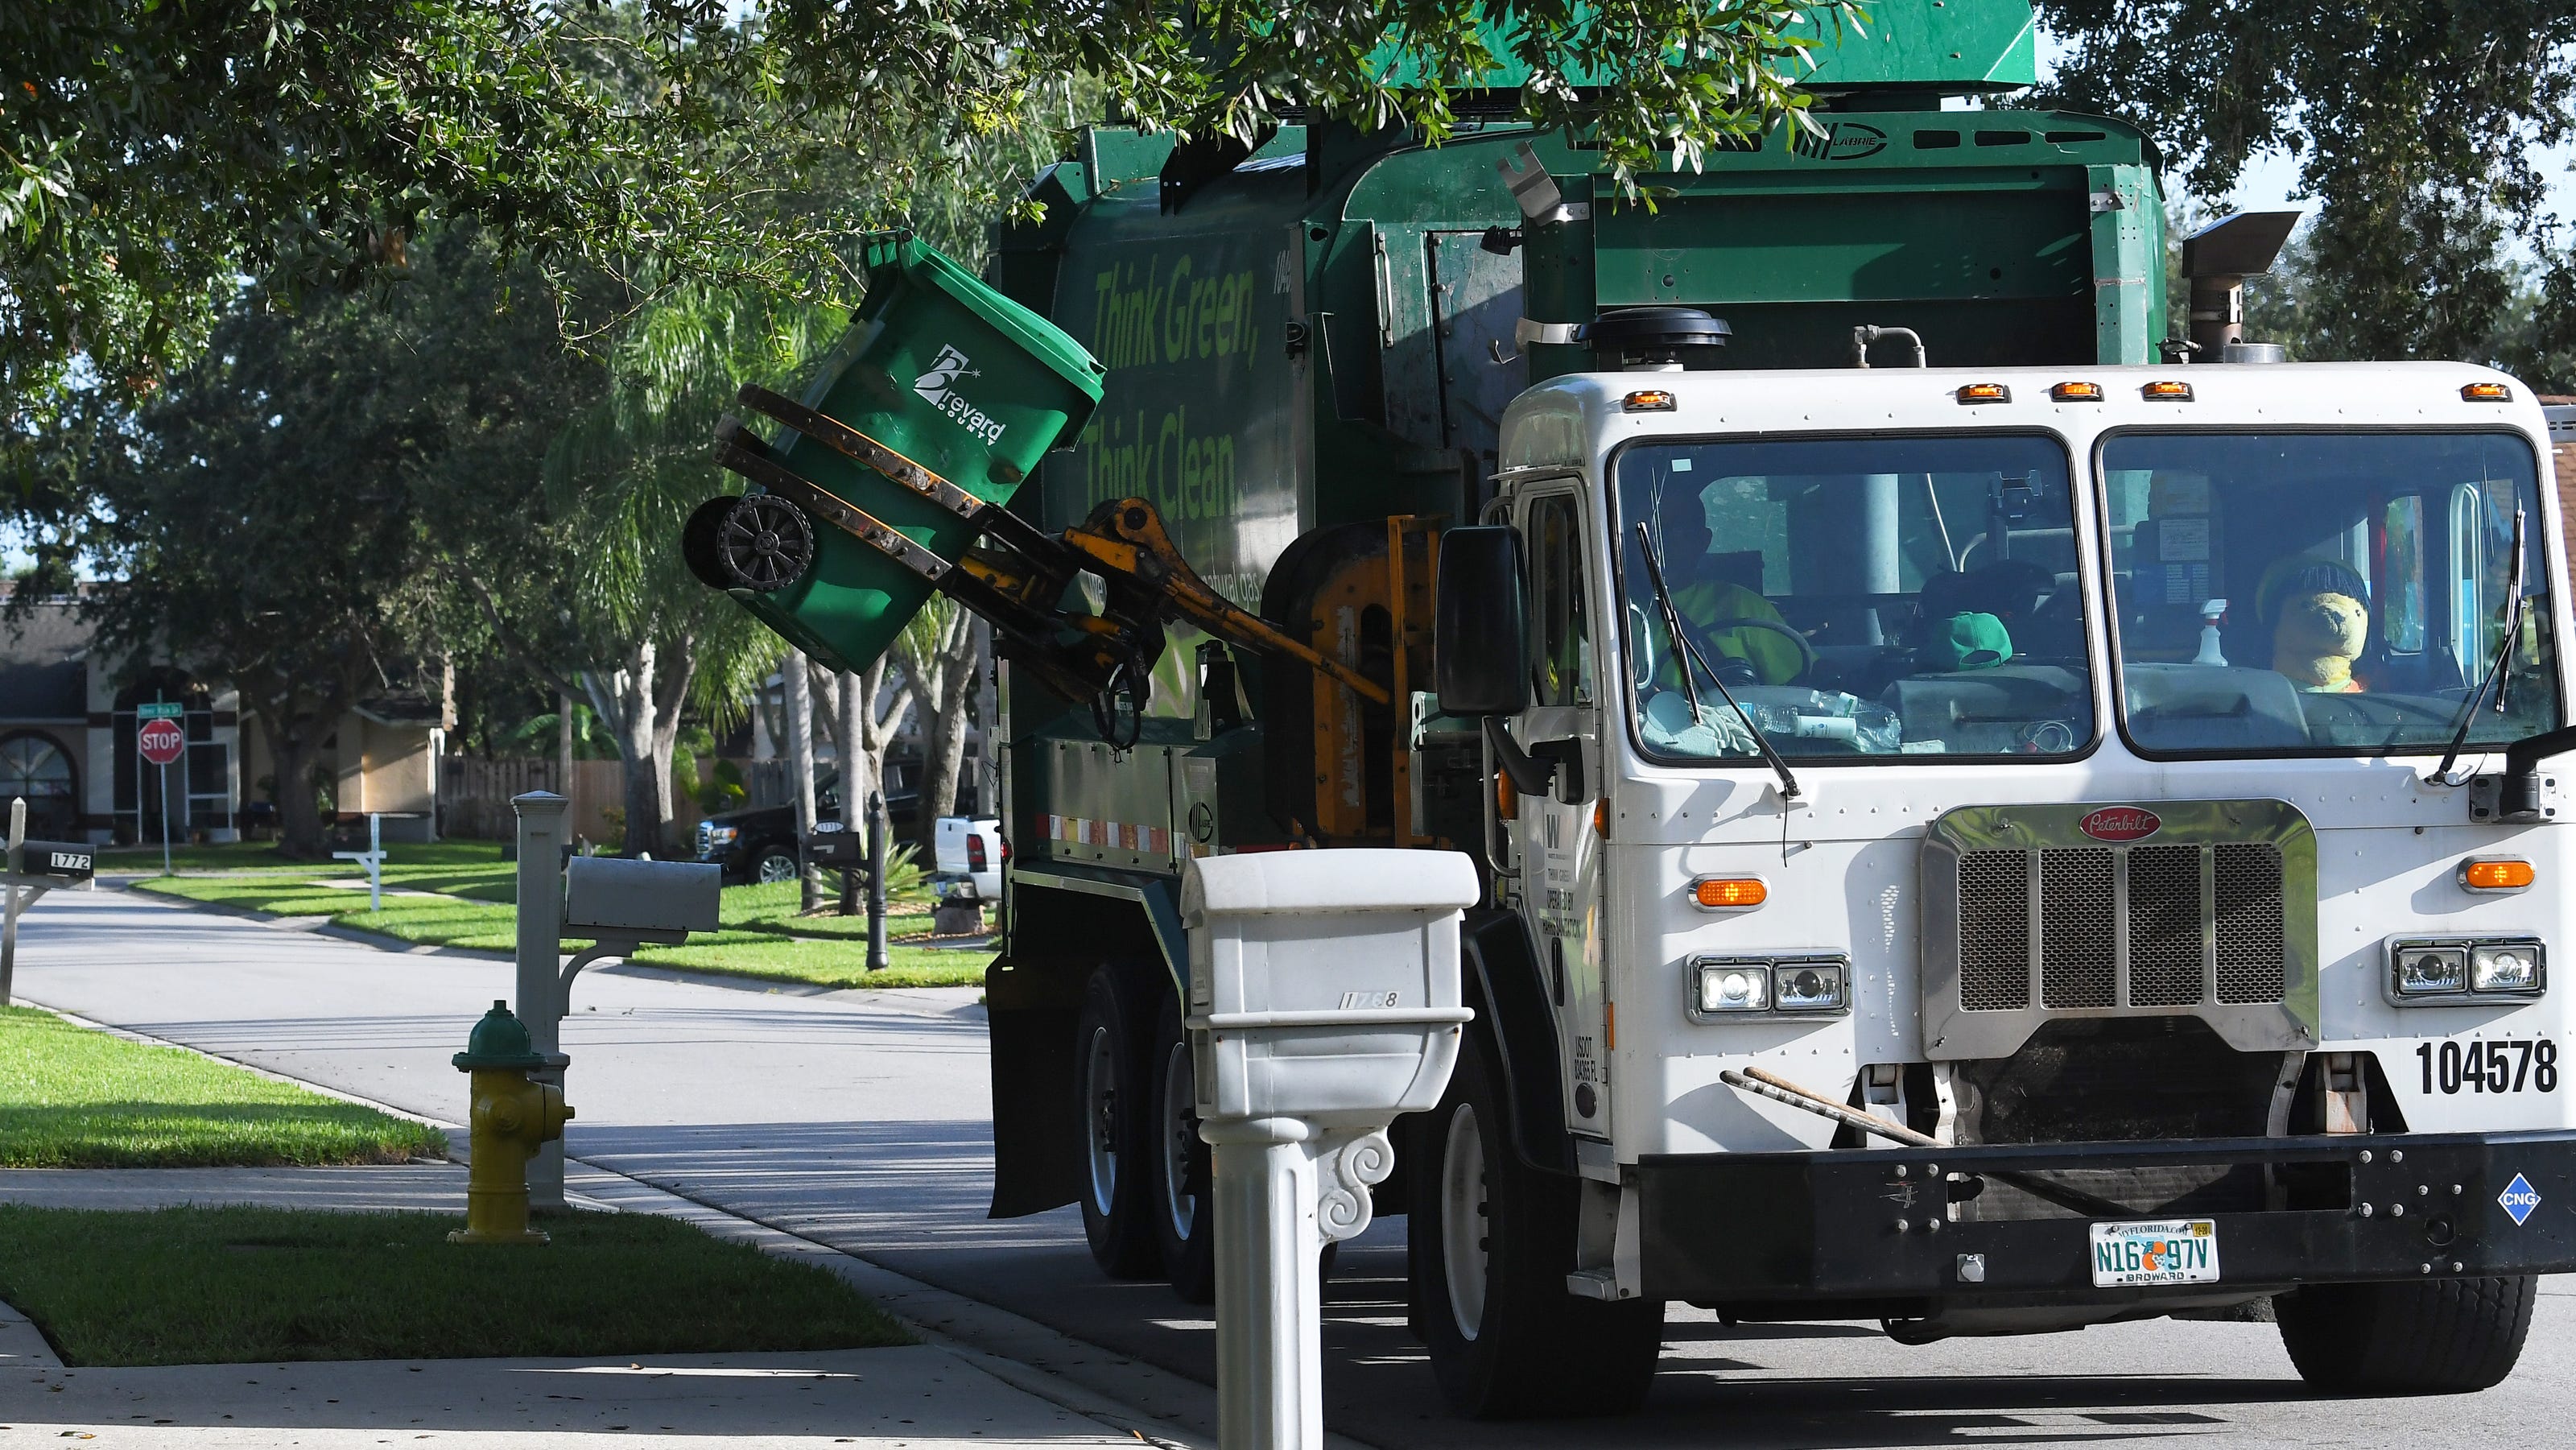 Brevard Waste Management trash collection to resume Friday